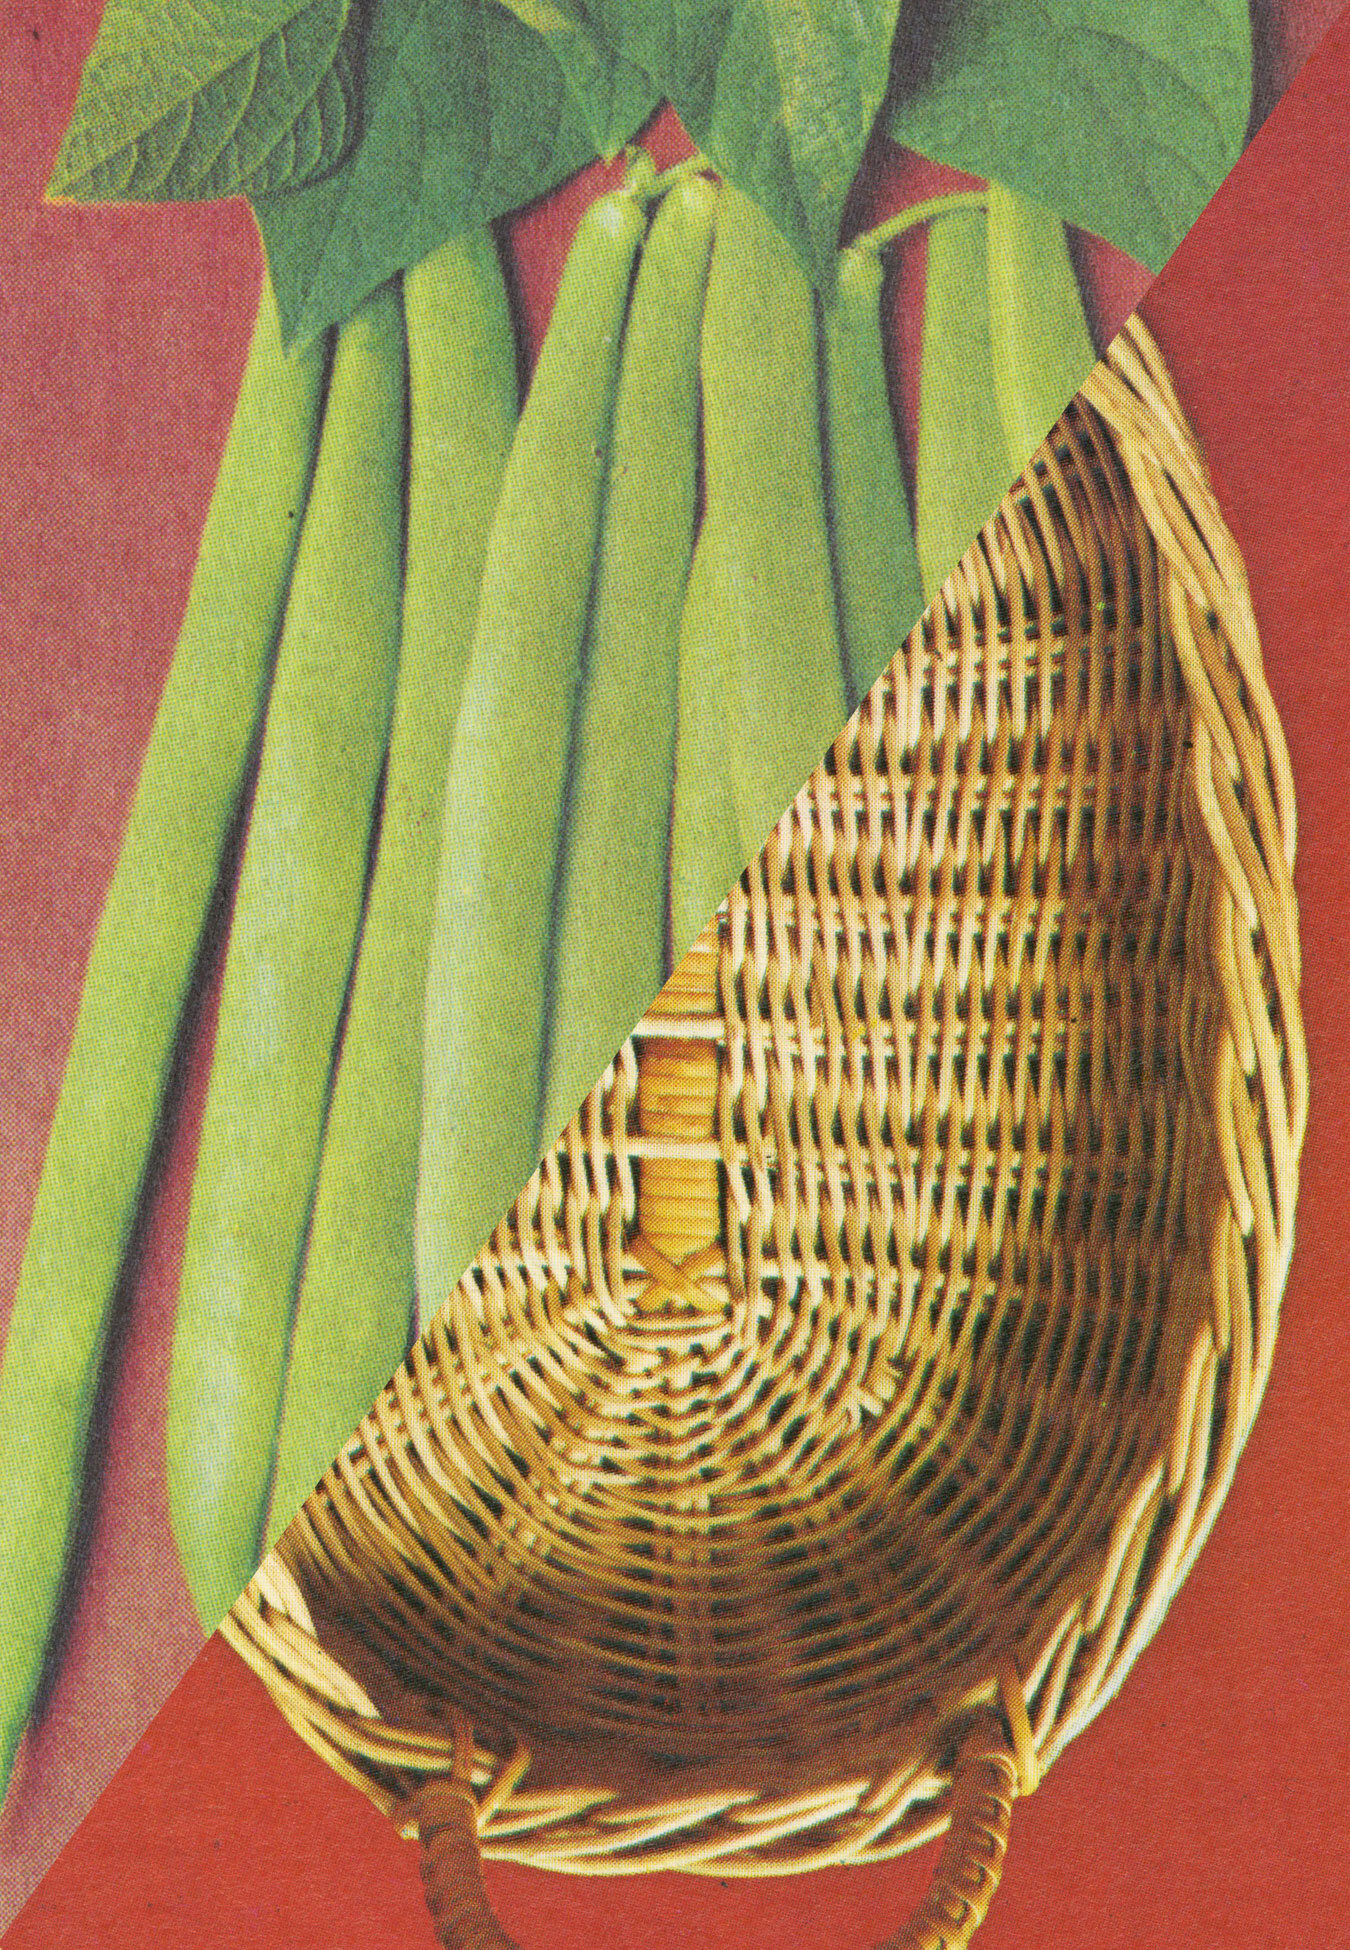  postcard included in   Baskets  book 4 x 6 inches edition of 25, 2015   